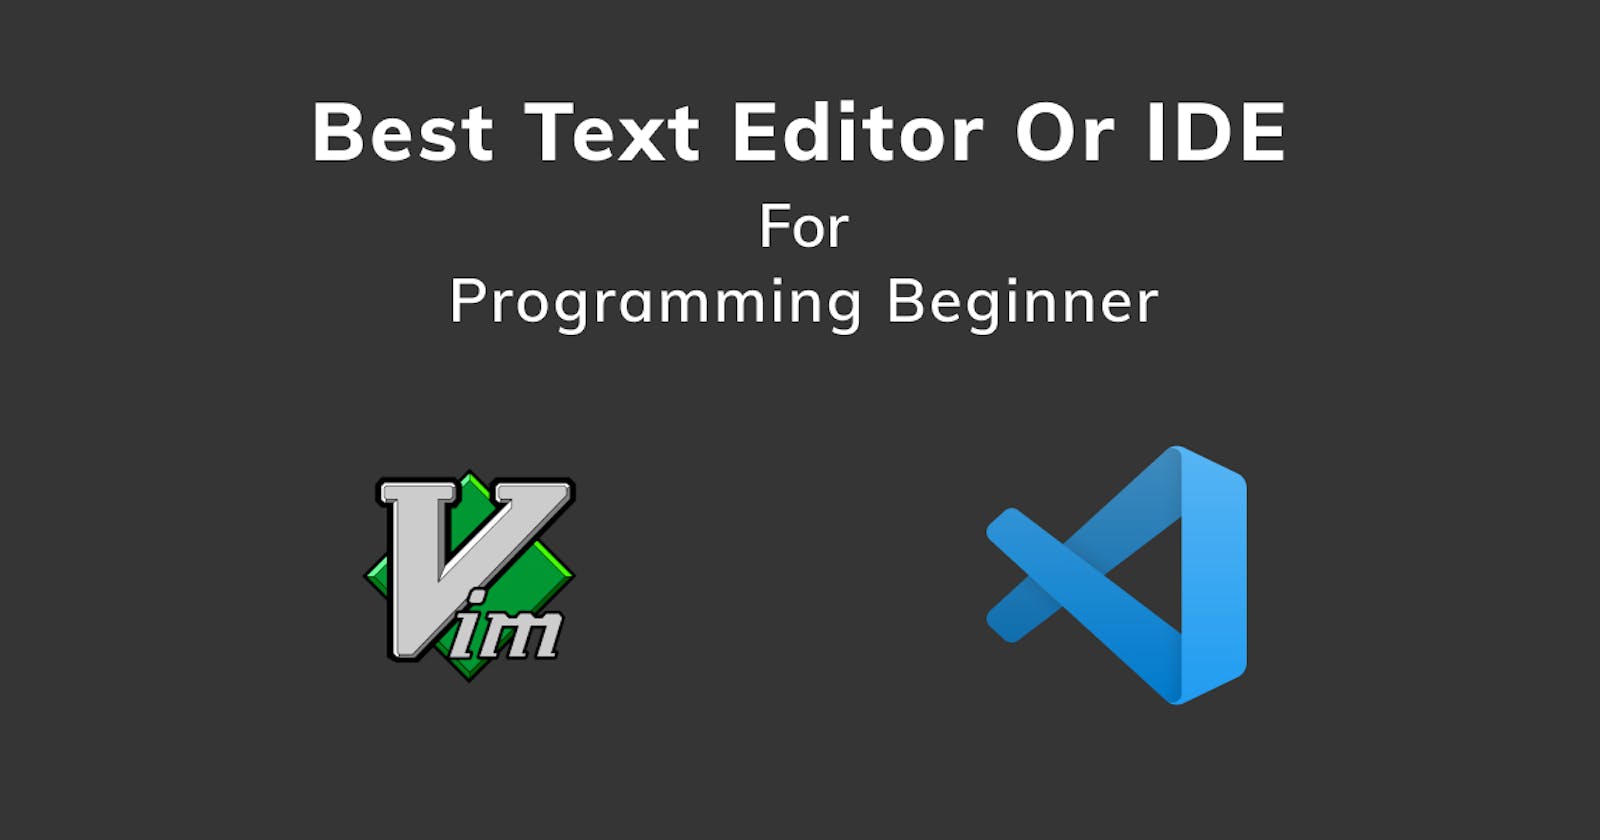 Choose a best text editor or IDE as a Programming beginner VIM or VScode